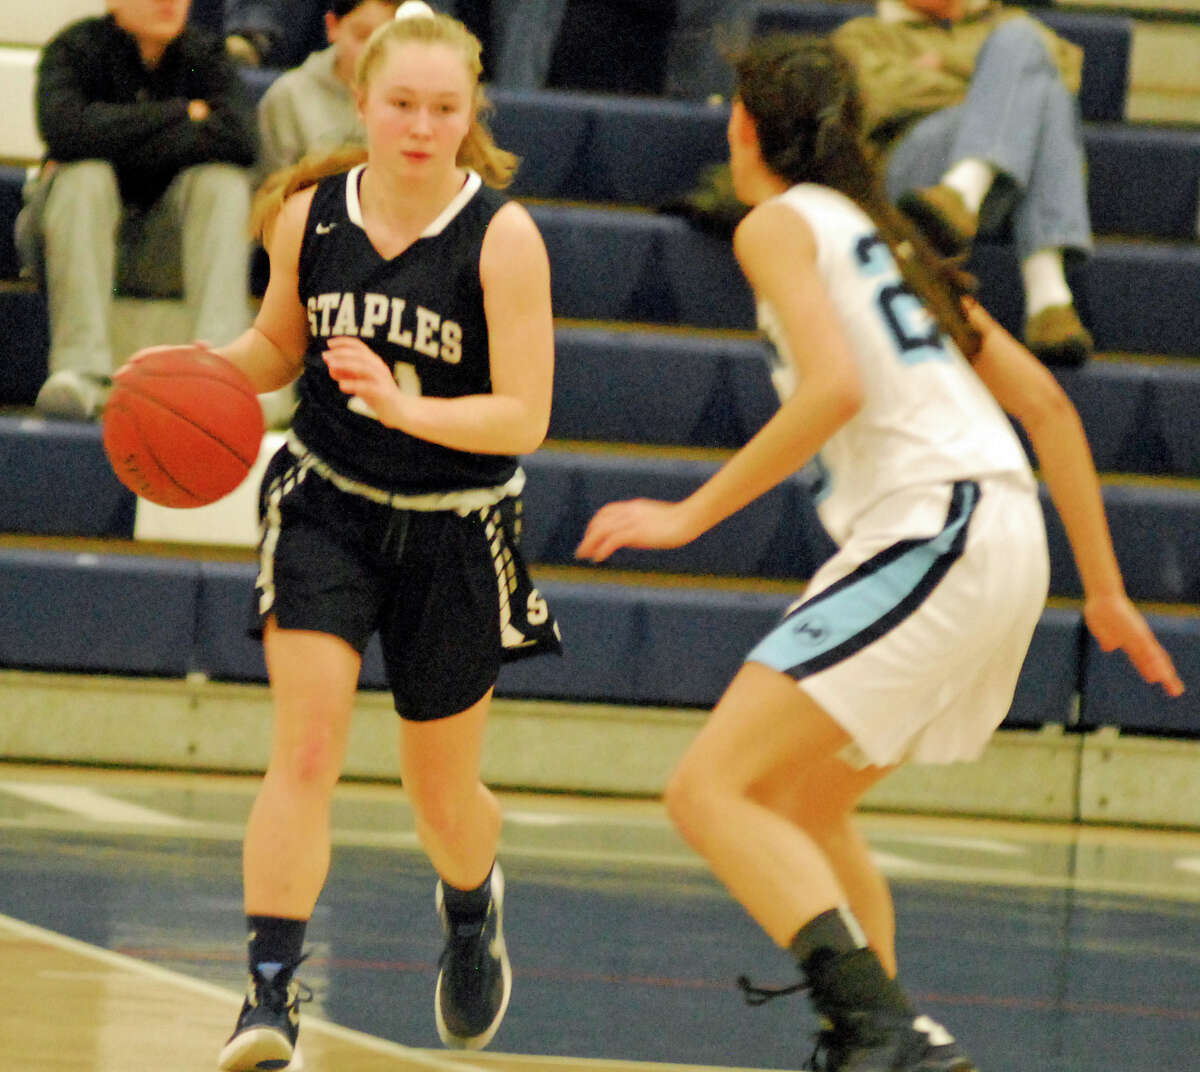 Staples' Olivia Troy dribbles up the court during a girls basketball game against Wilton on Monday, February 15th, 2016. Troy had 12 points in a 40-30 loss.